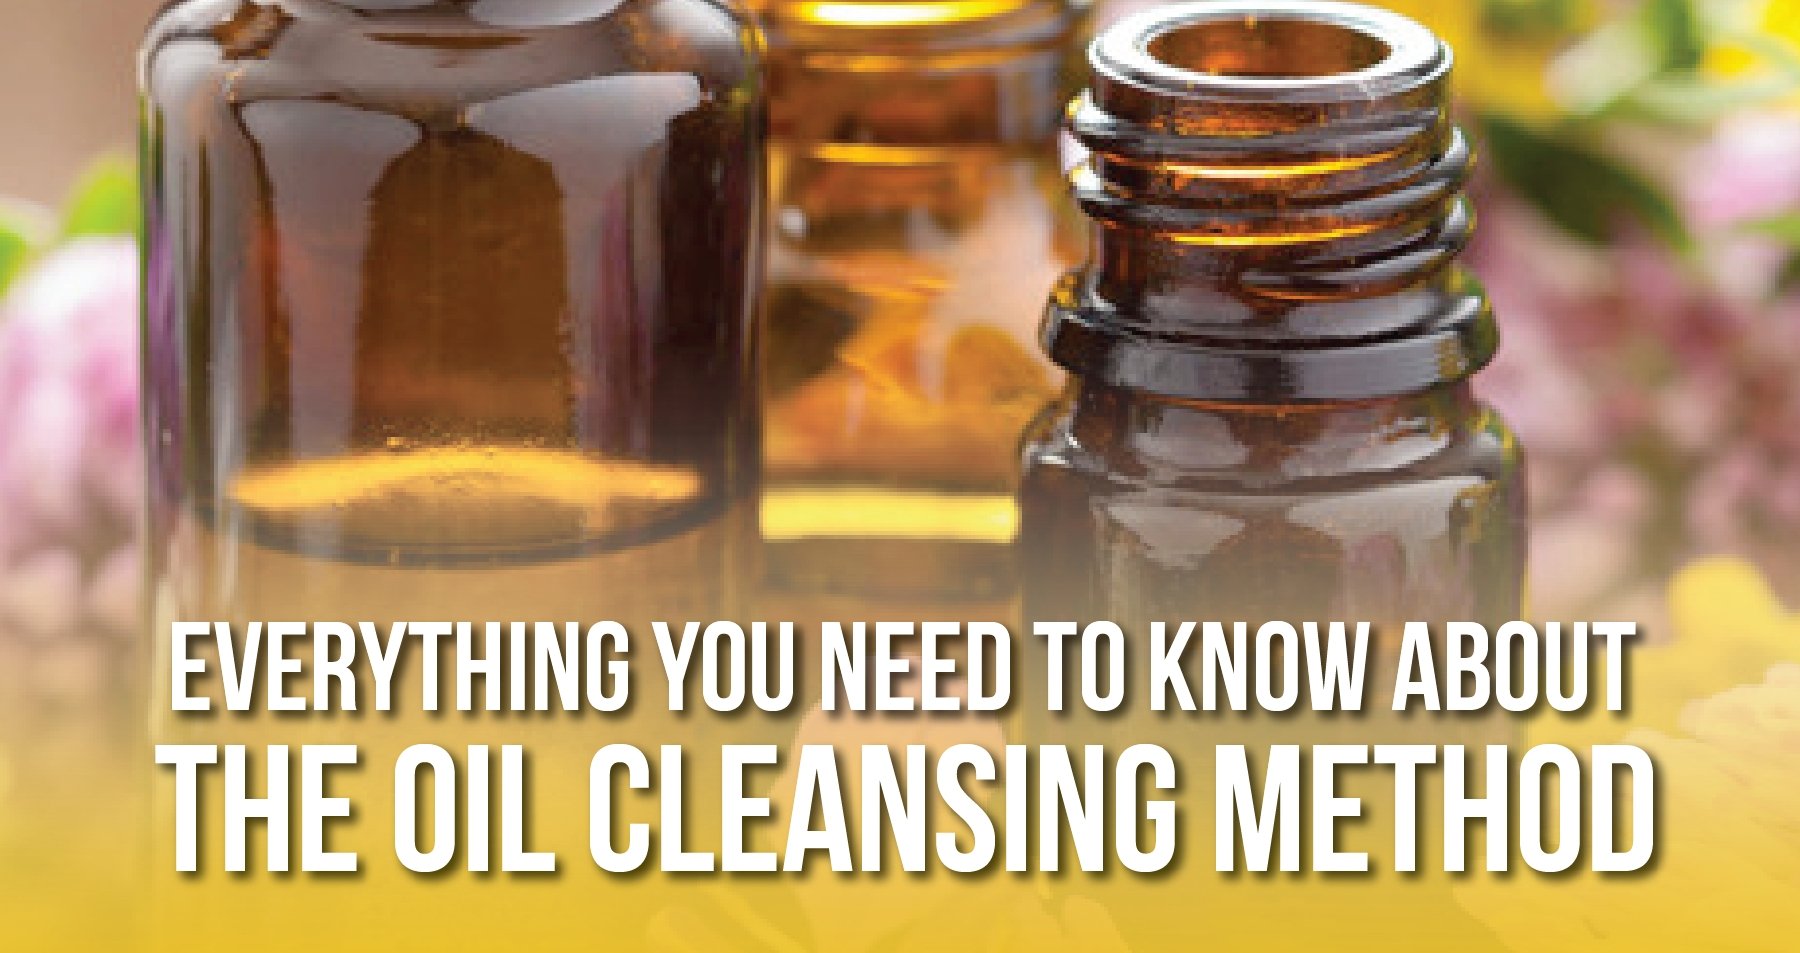 Everything You Need to Know About the Oil Cleansing Method | iHeart Nature